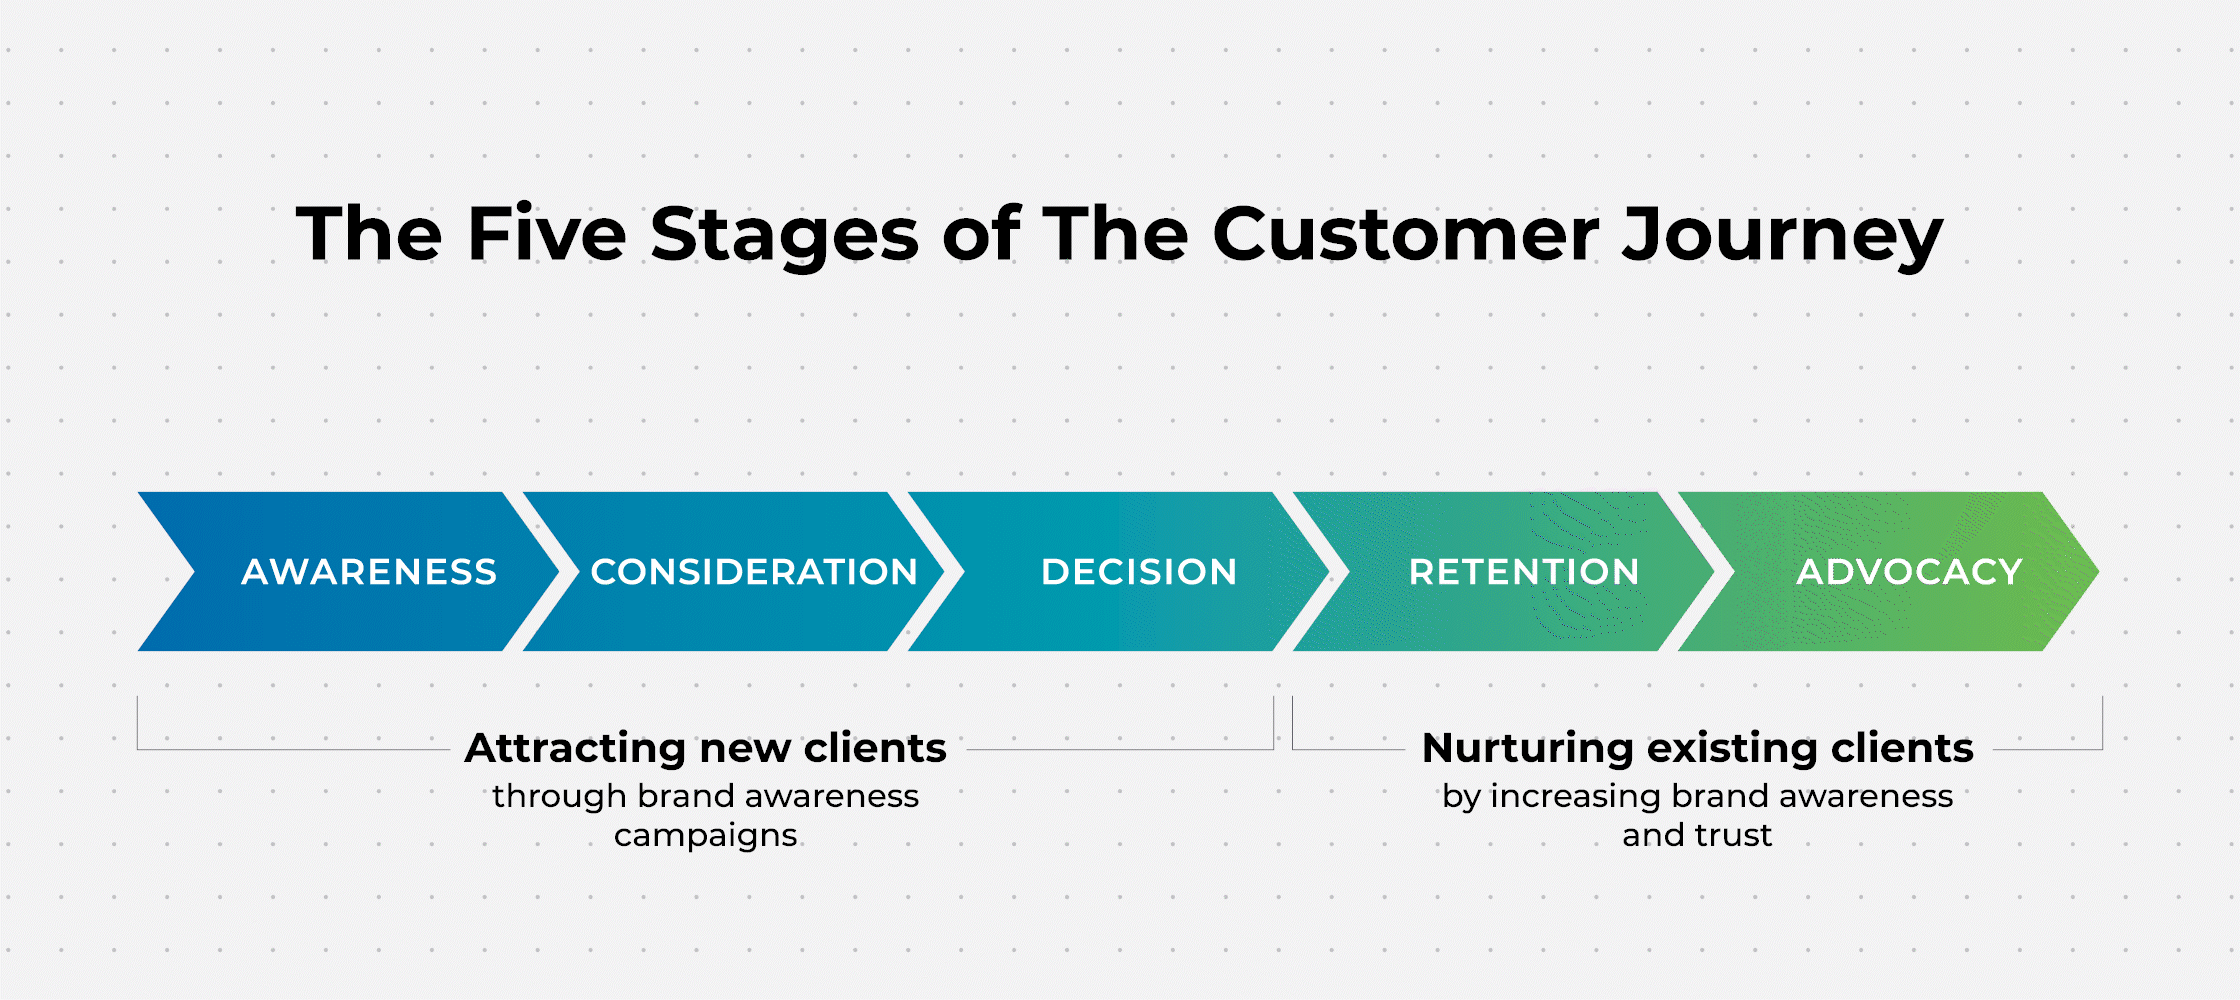 High-performing brands create a distinct journey through the five phases